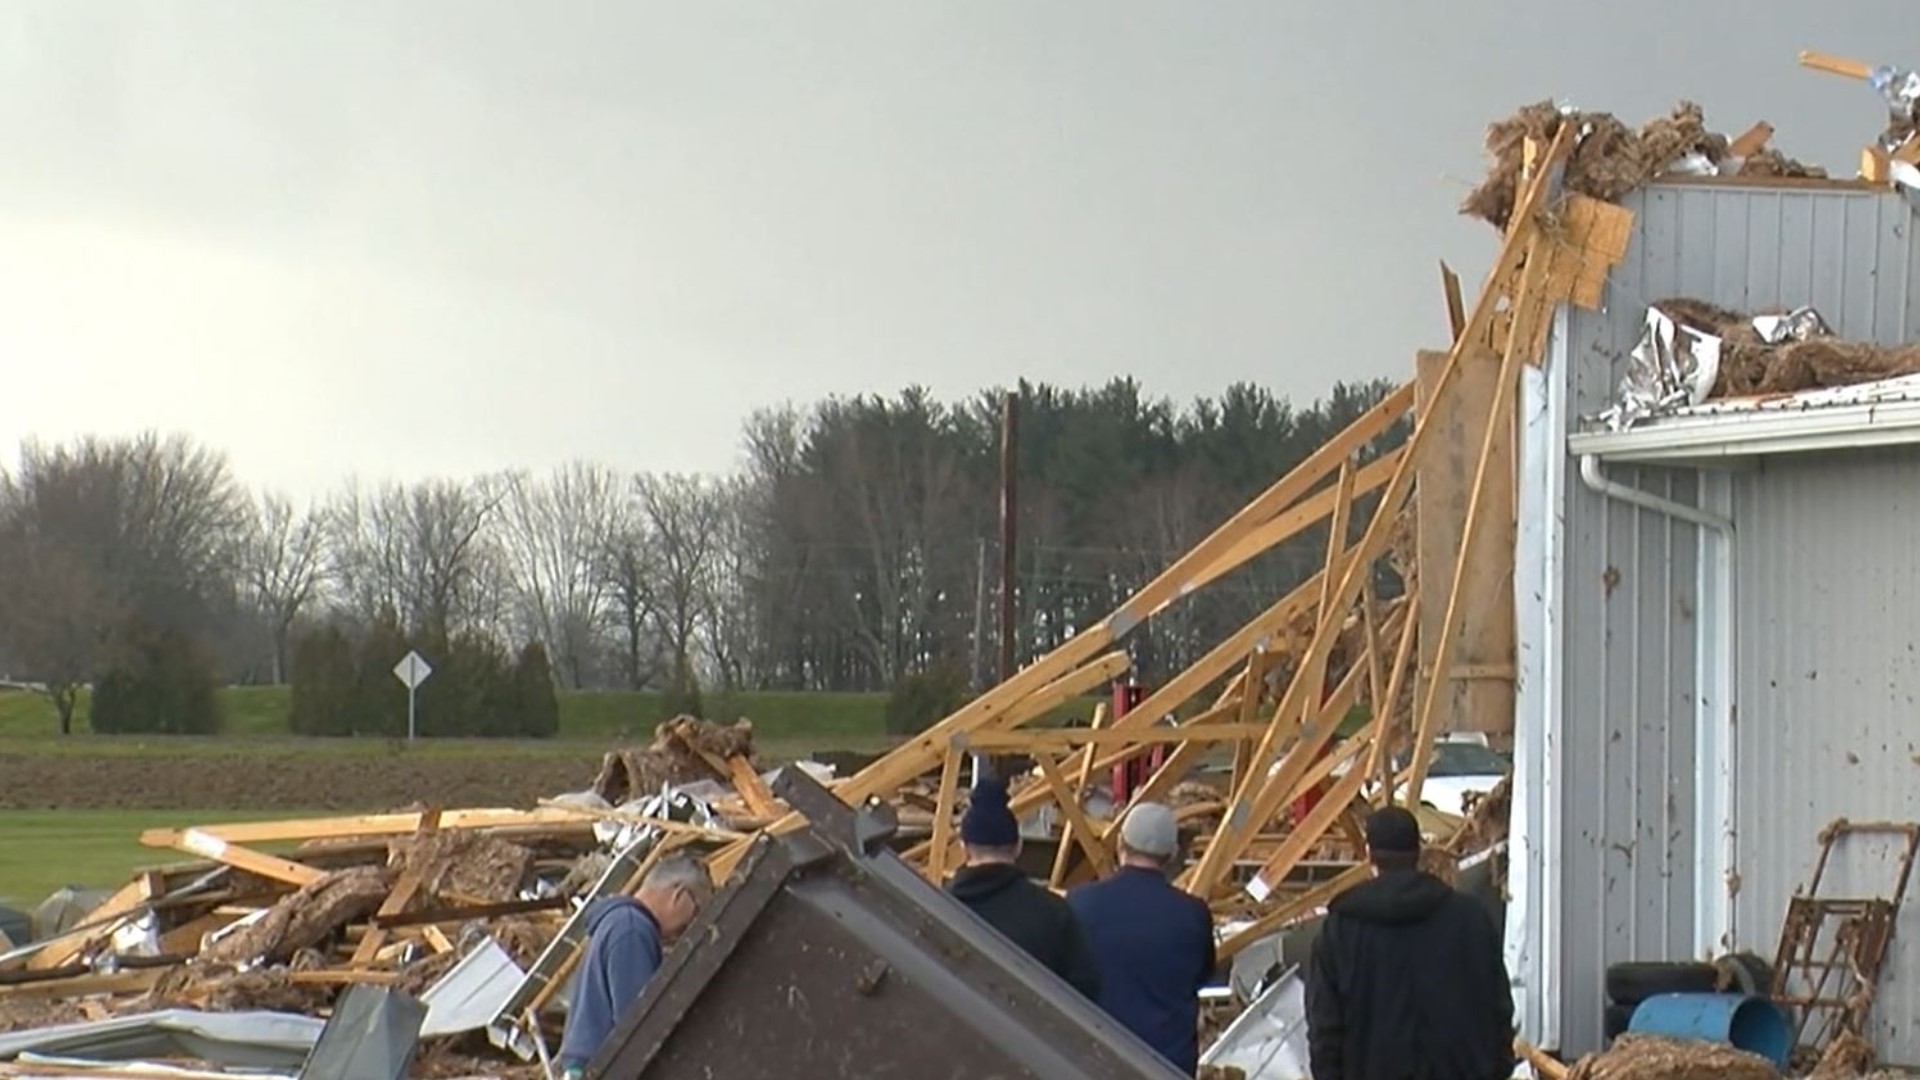 The damage happened near State Route 235 and State Route 309, in northwest Ohio, about two miles south of the Village of Ada.